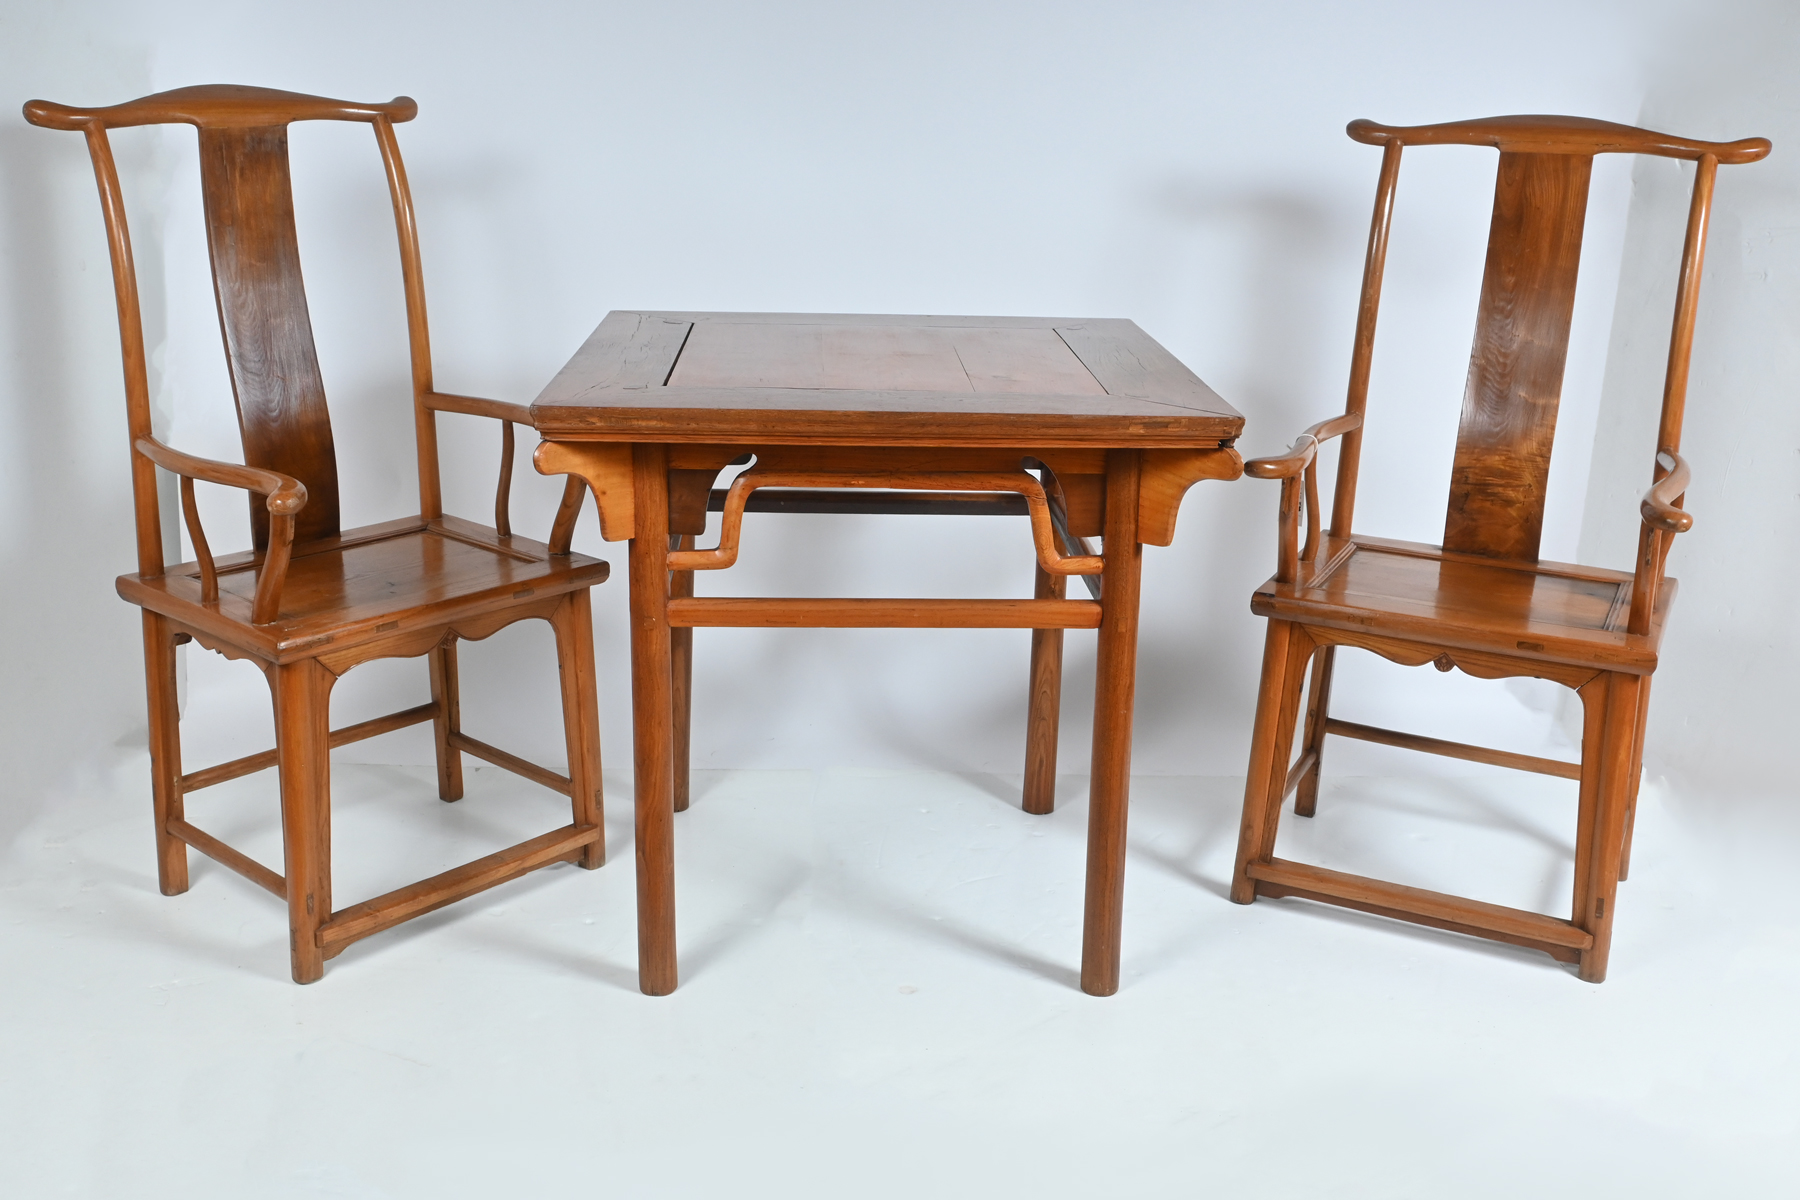 3 PC 19TH CENTURY CHINESE TABLE 27670d